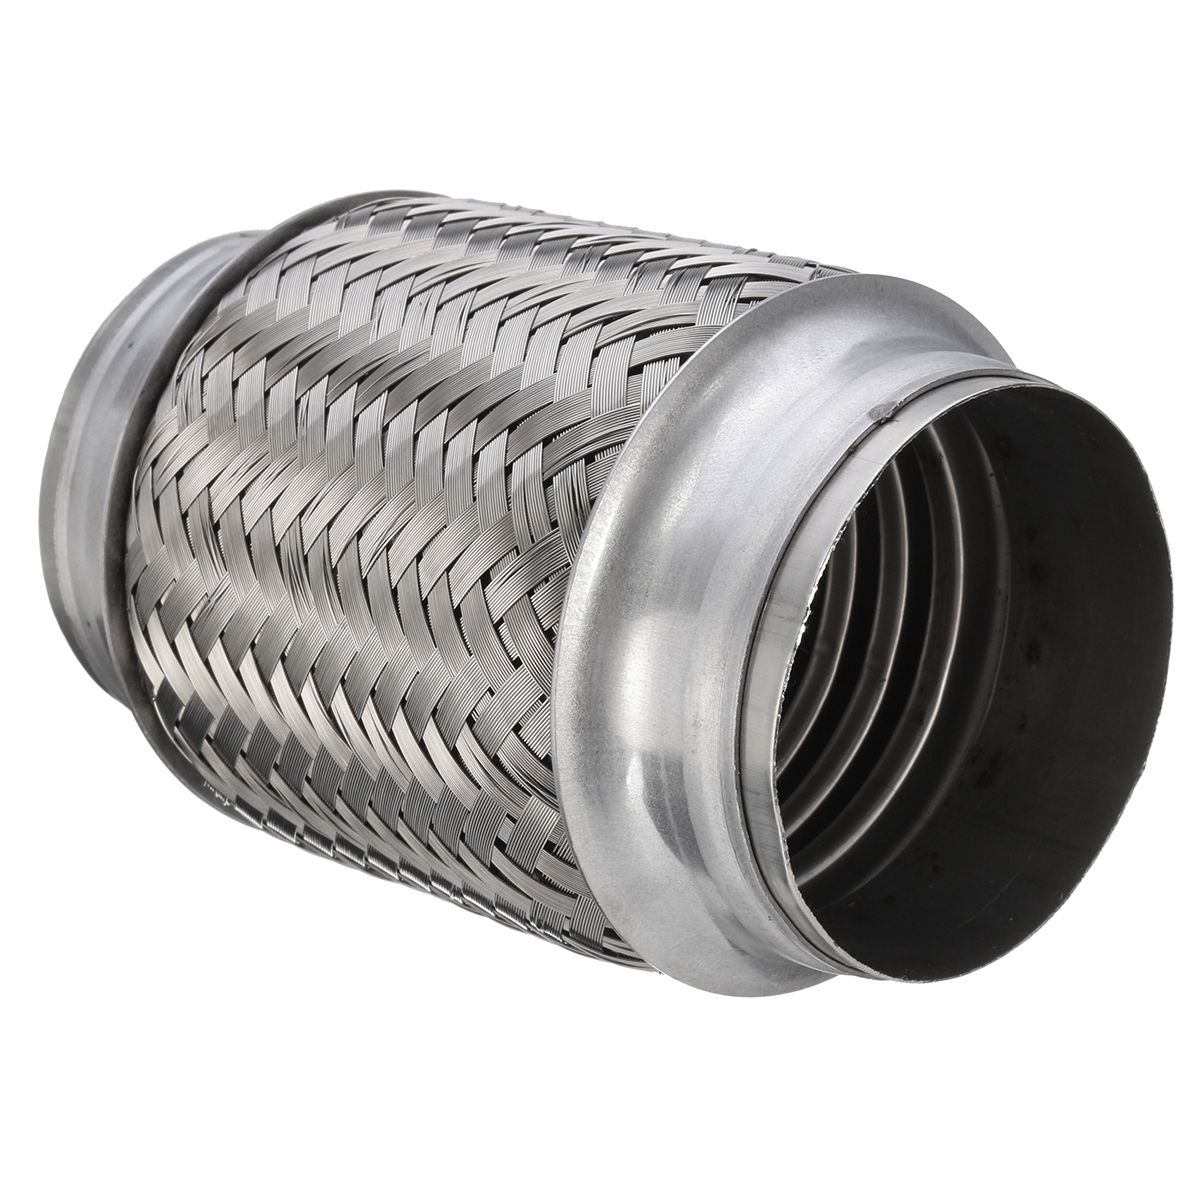 Exhaust-Flex-Pipe-Tube-Stainless-Steel-Double-Braid-3-Inch-X-6-Inch-w-Ends-Flexi-1251553